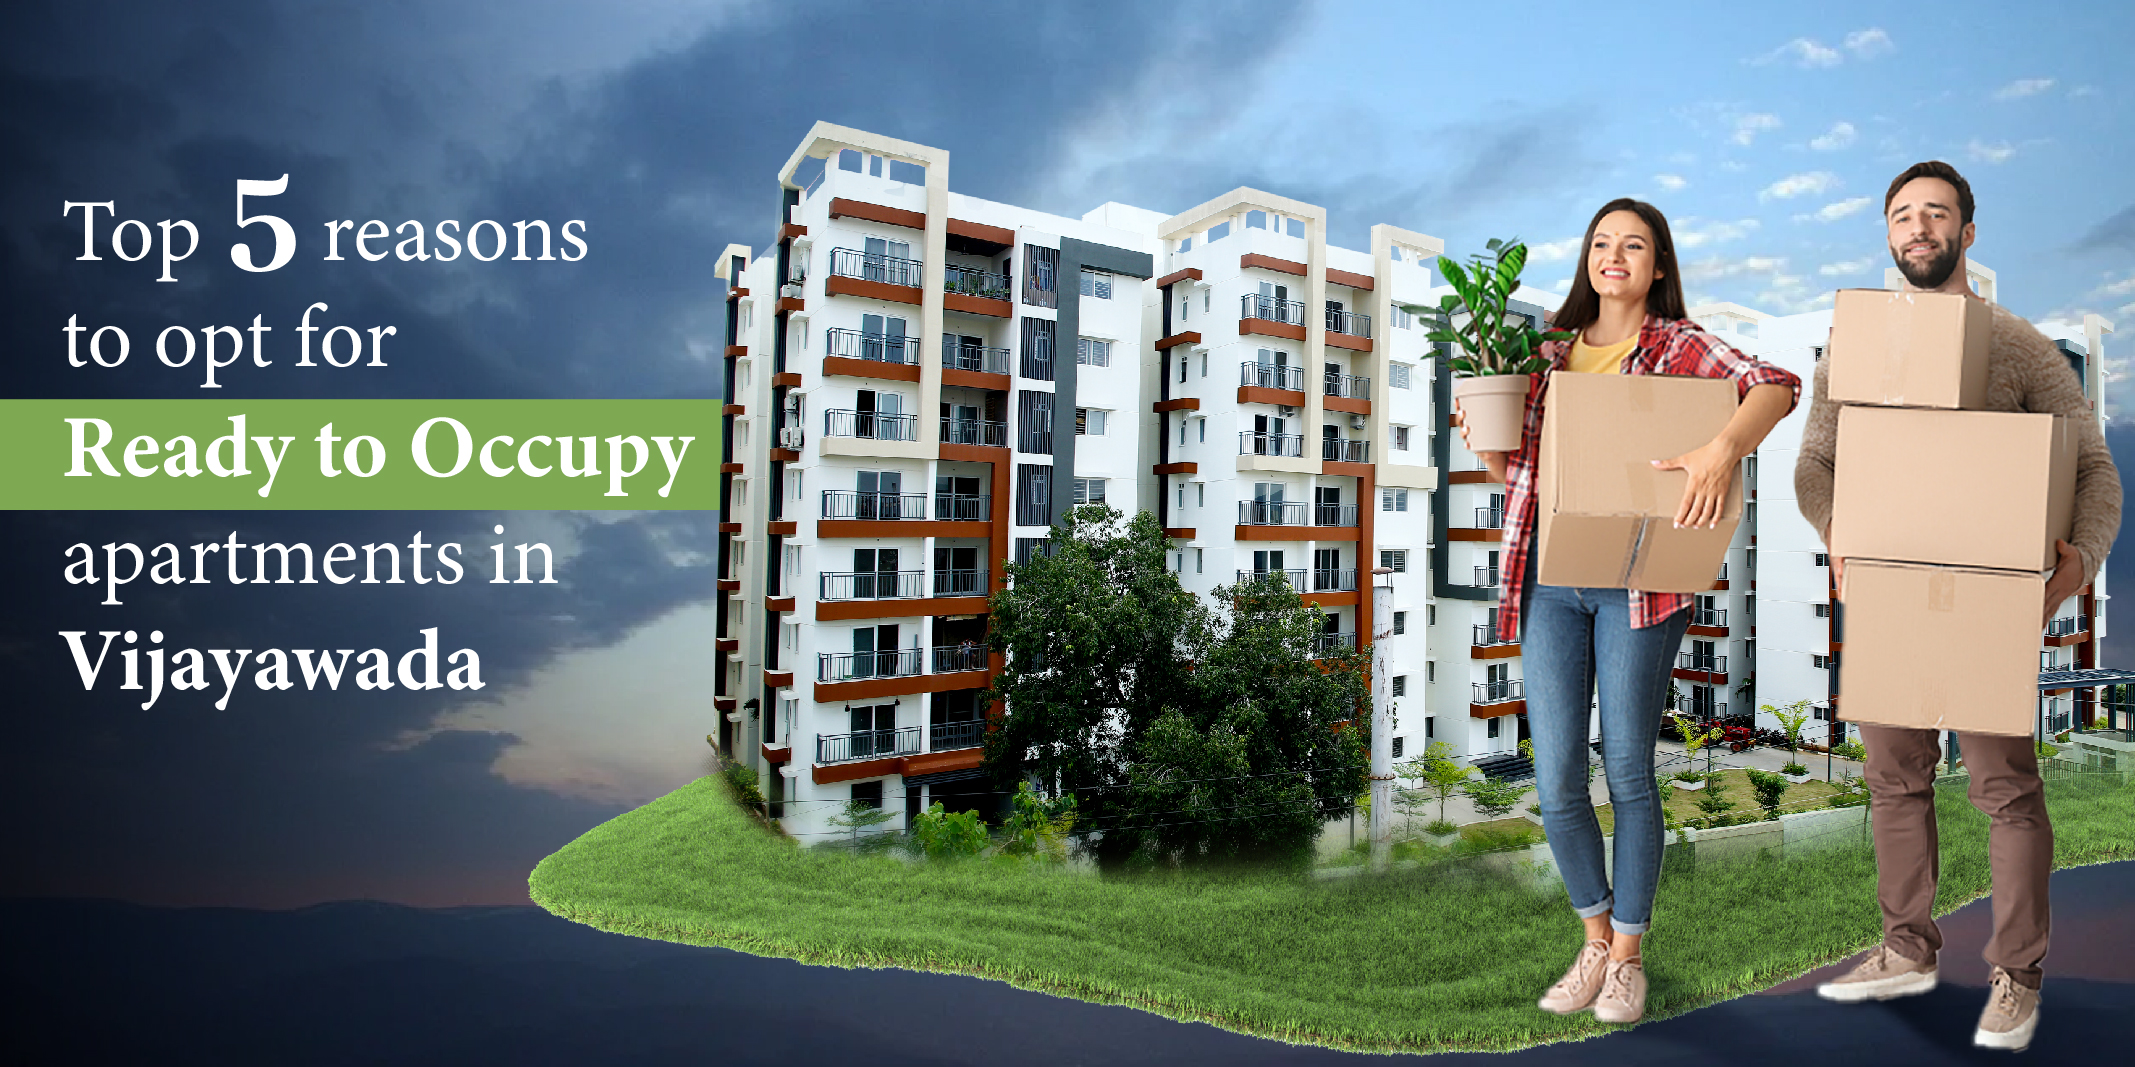 Top 5 reasons to opt for ready to occupy apartments in Vijayawada